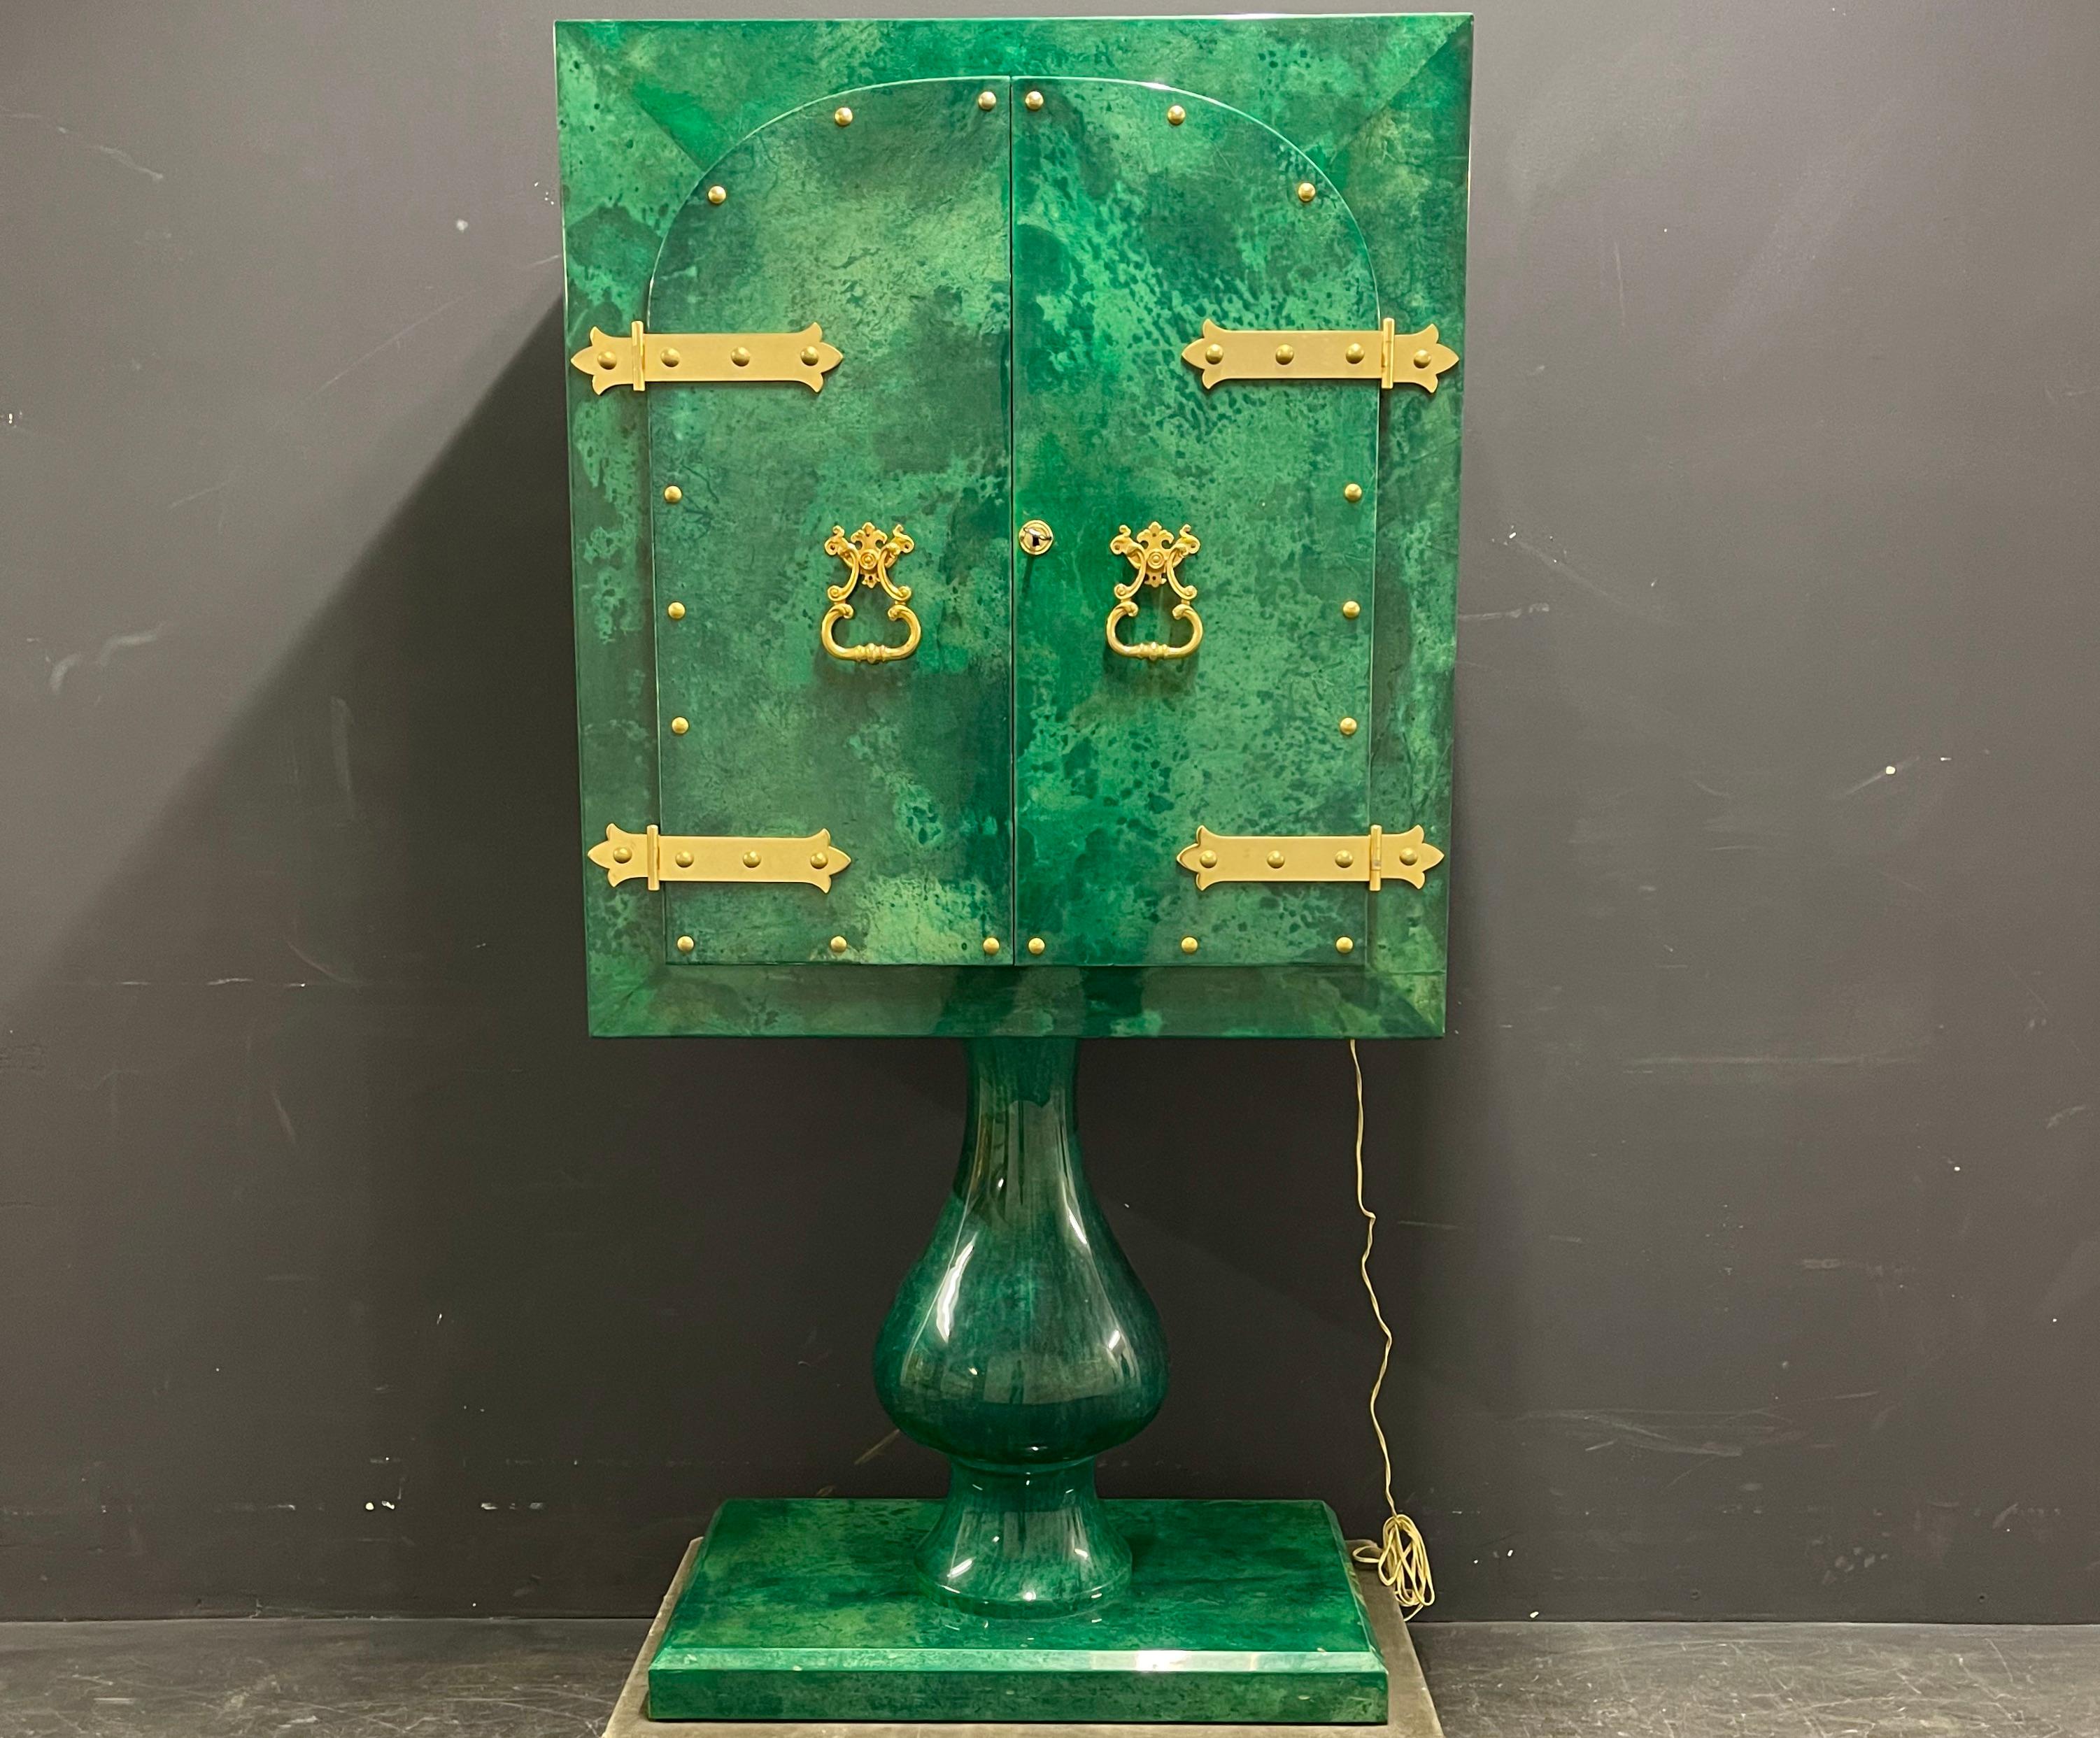 usually this typ of cabinet is made of goatskin combined with rosewood or another color. in this case aldo tura made a unique all malachite green bar cabinet on customers choice. something we never saw or heard off before. this cabinet offers the